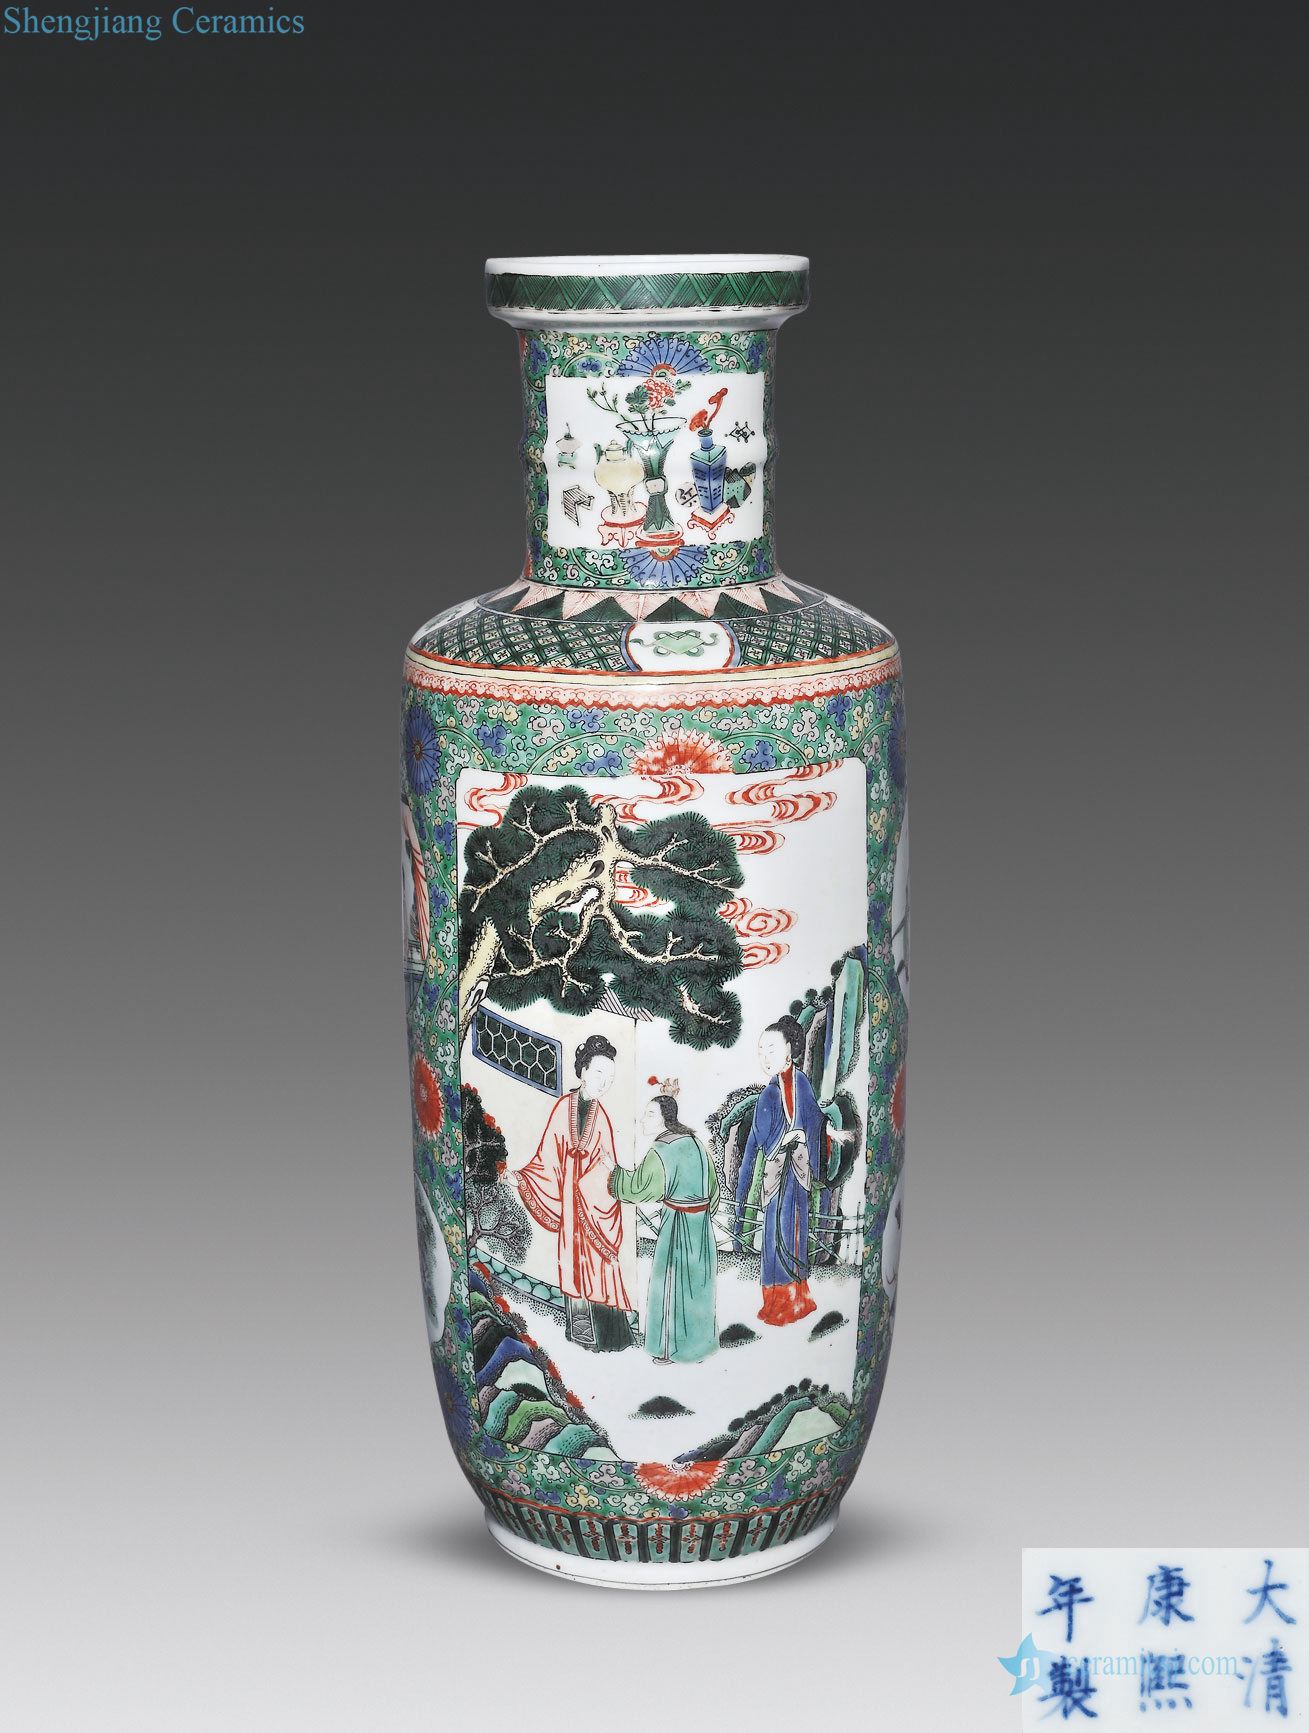 In late qing dynasty Colorful flower medallion character lines were bottles